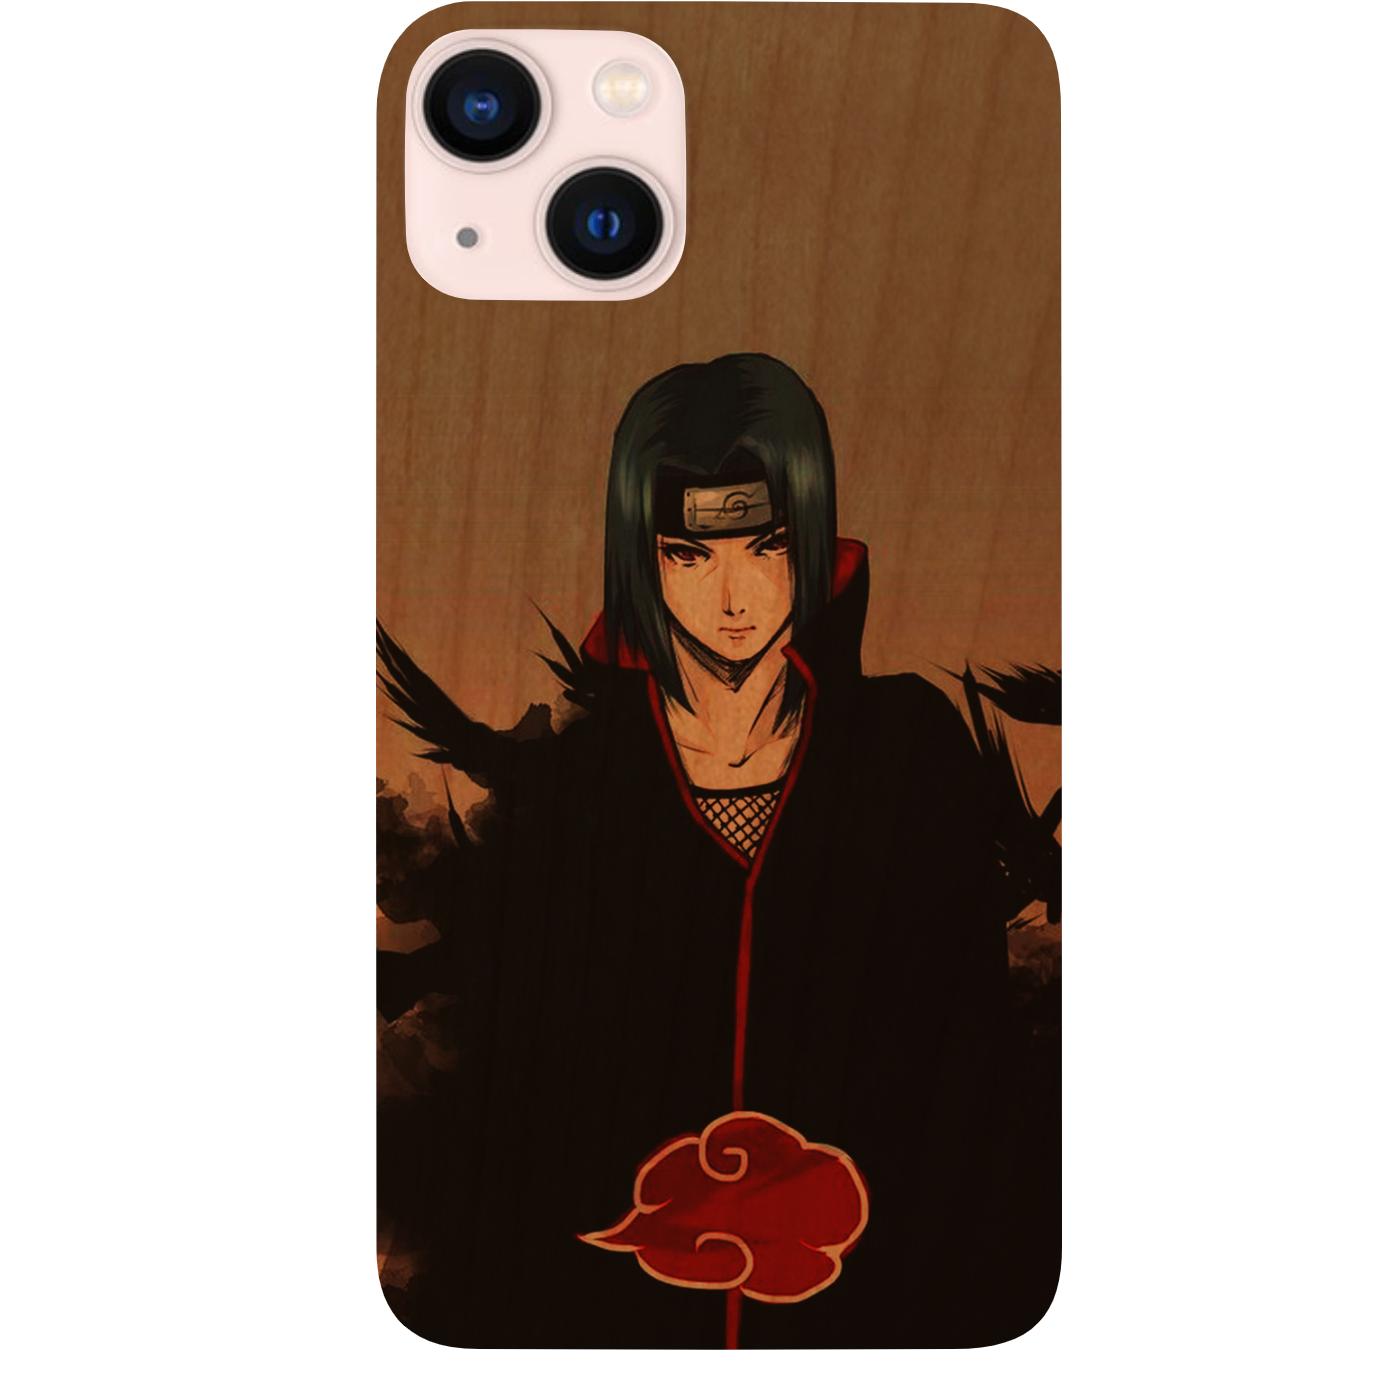 itachi and his lover